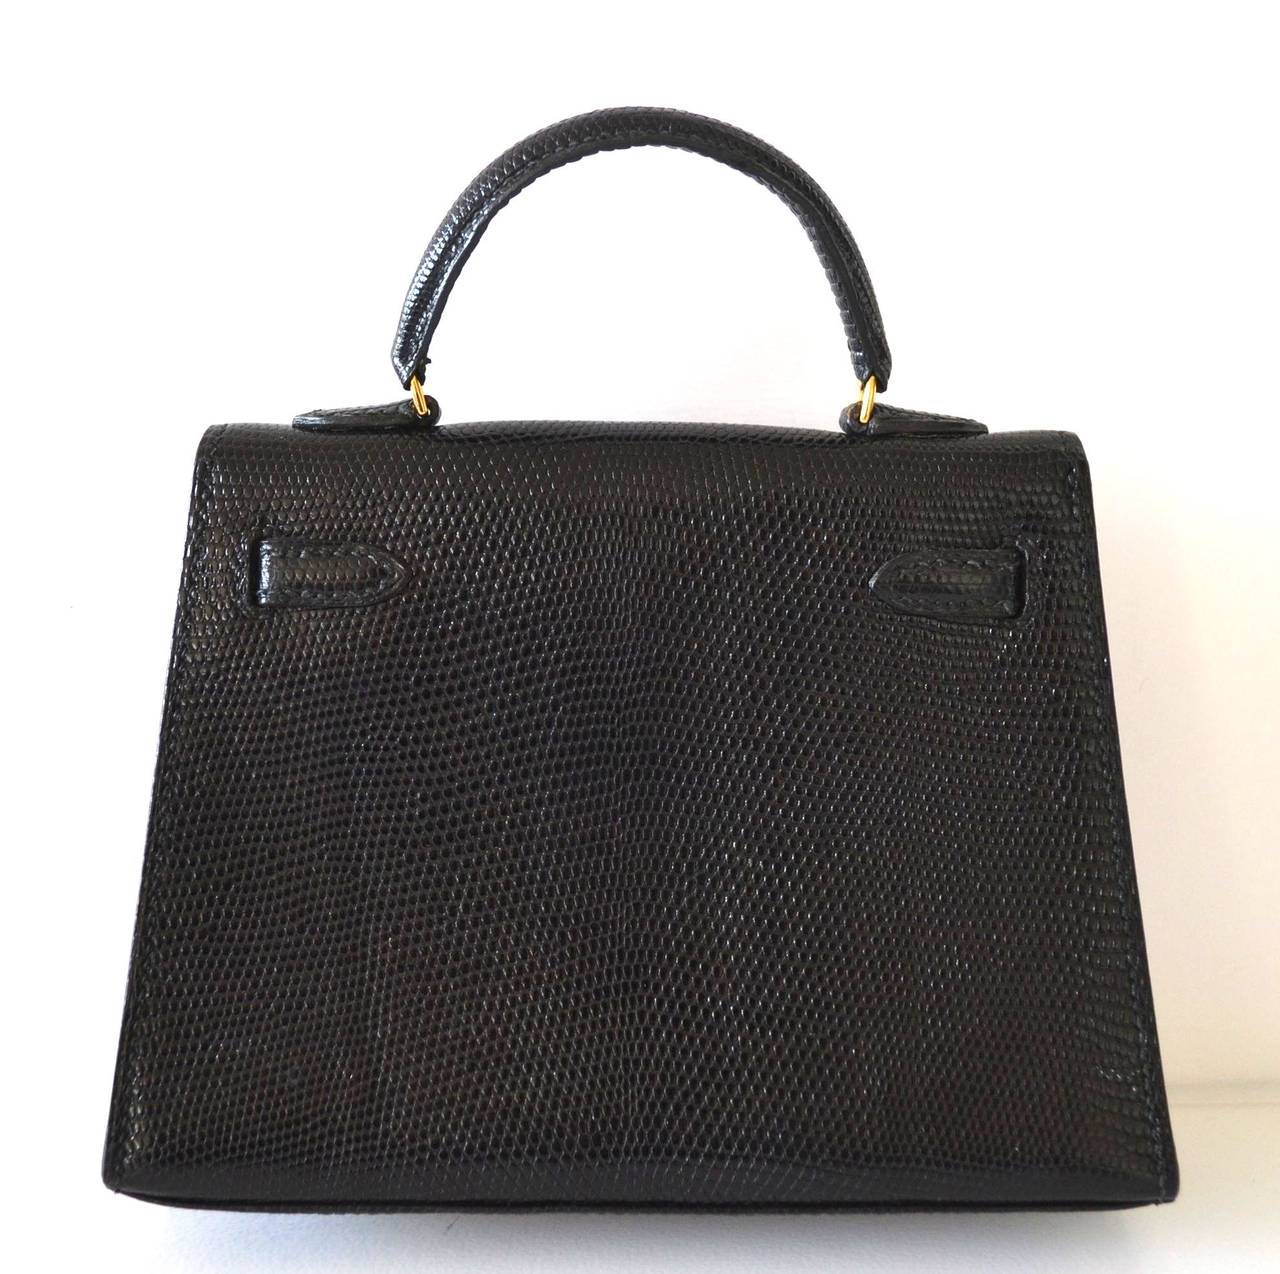 Exceptional Hermes Kelly 15 Lizard Black
 
Kelly 15 is a very very rare size
Probably less than 50 in the world
Collector piece
 
Black Lizard Niloticus
Gold hardware
Chevre lining
 
Very good condition
Odorless
Handle and corners are